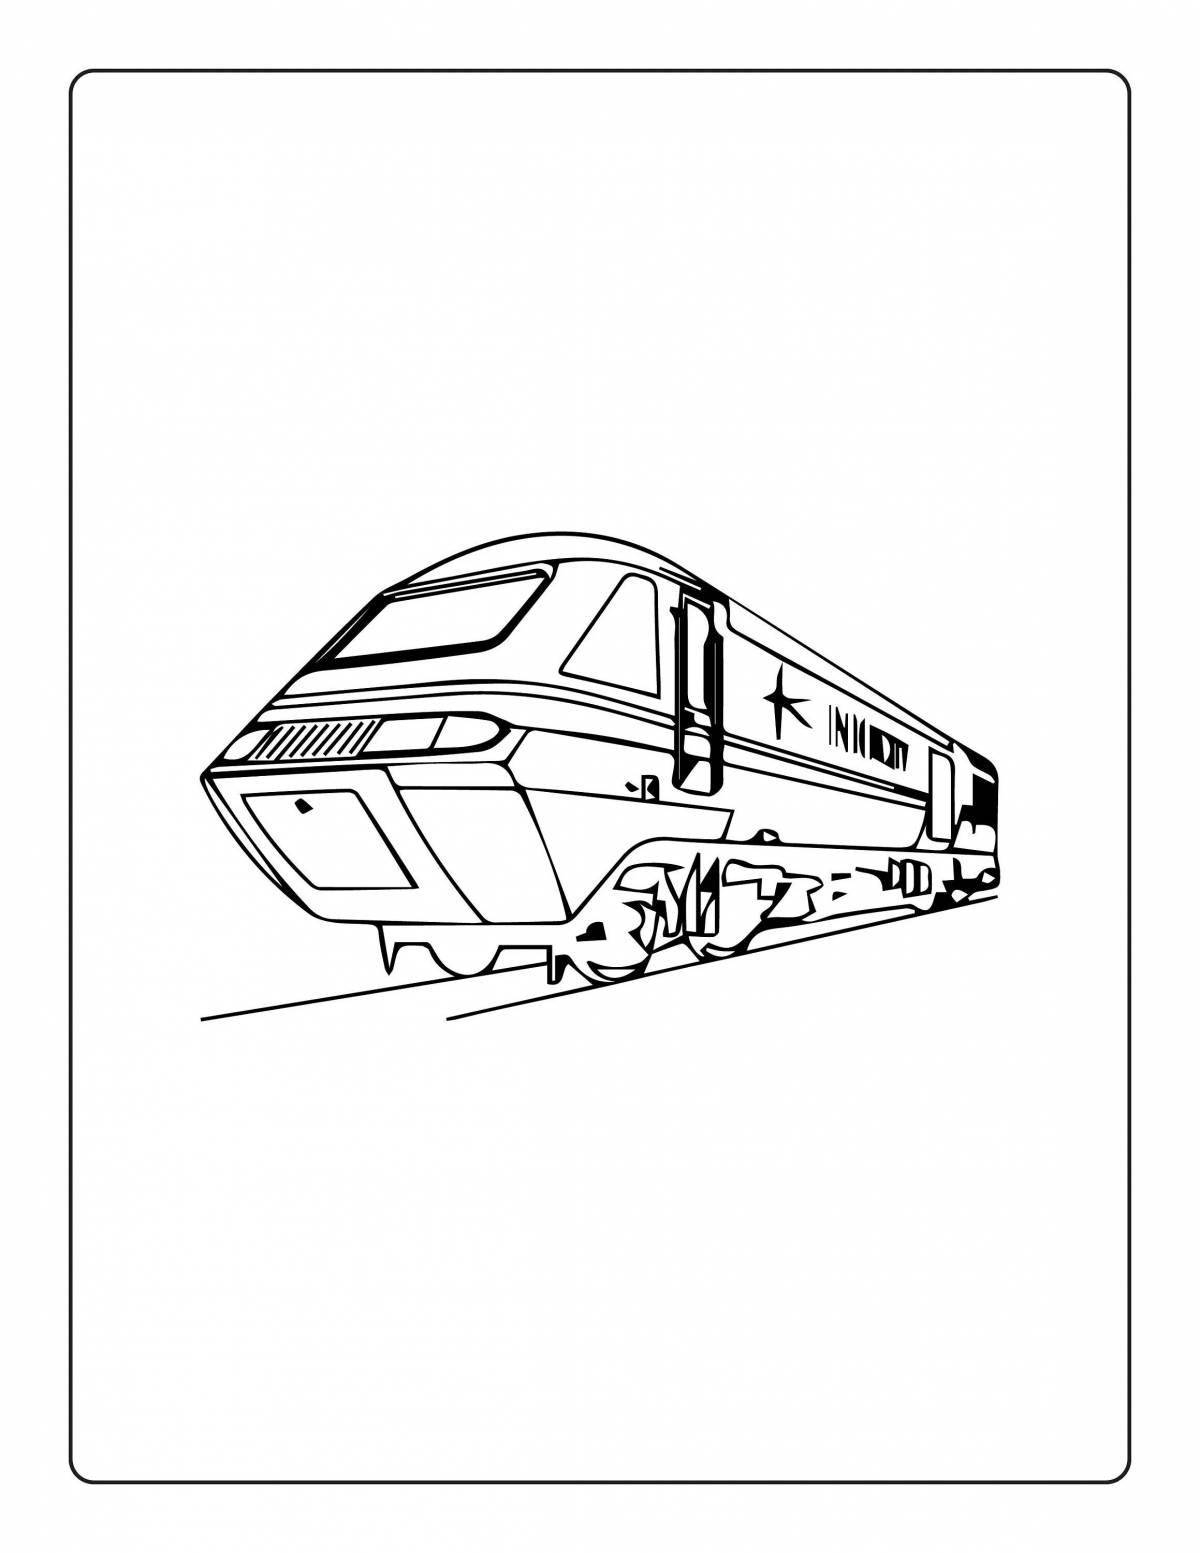 Wonderful electric locomotive coloring book for kids